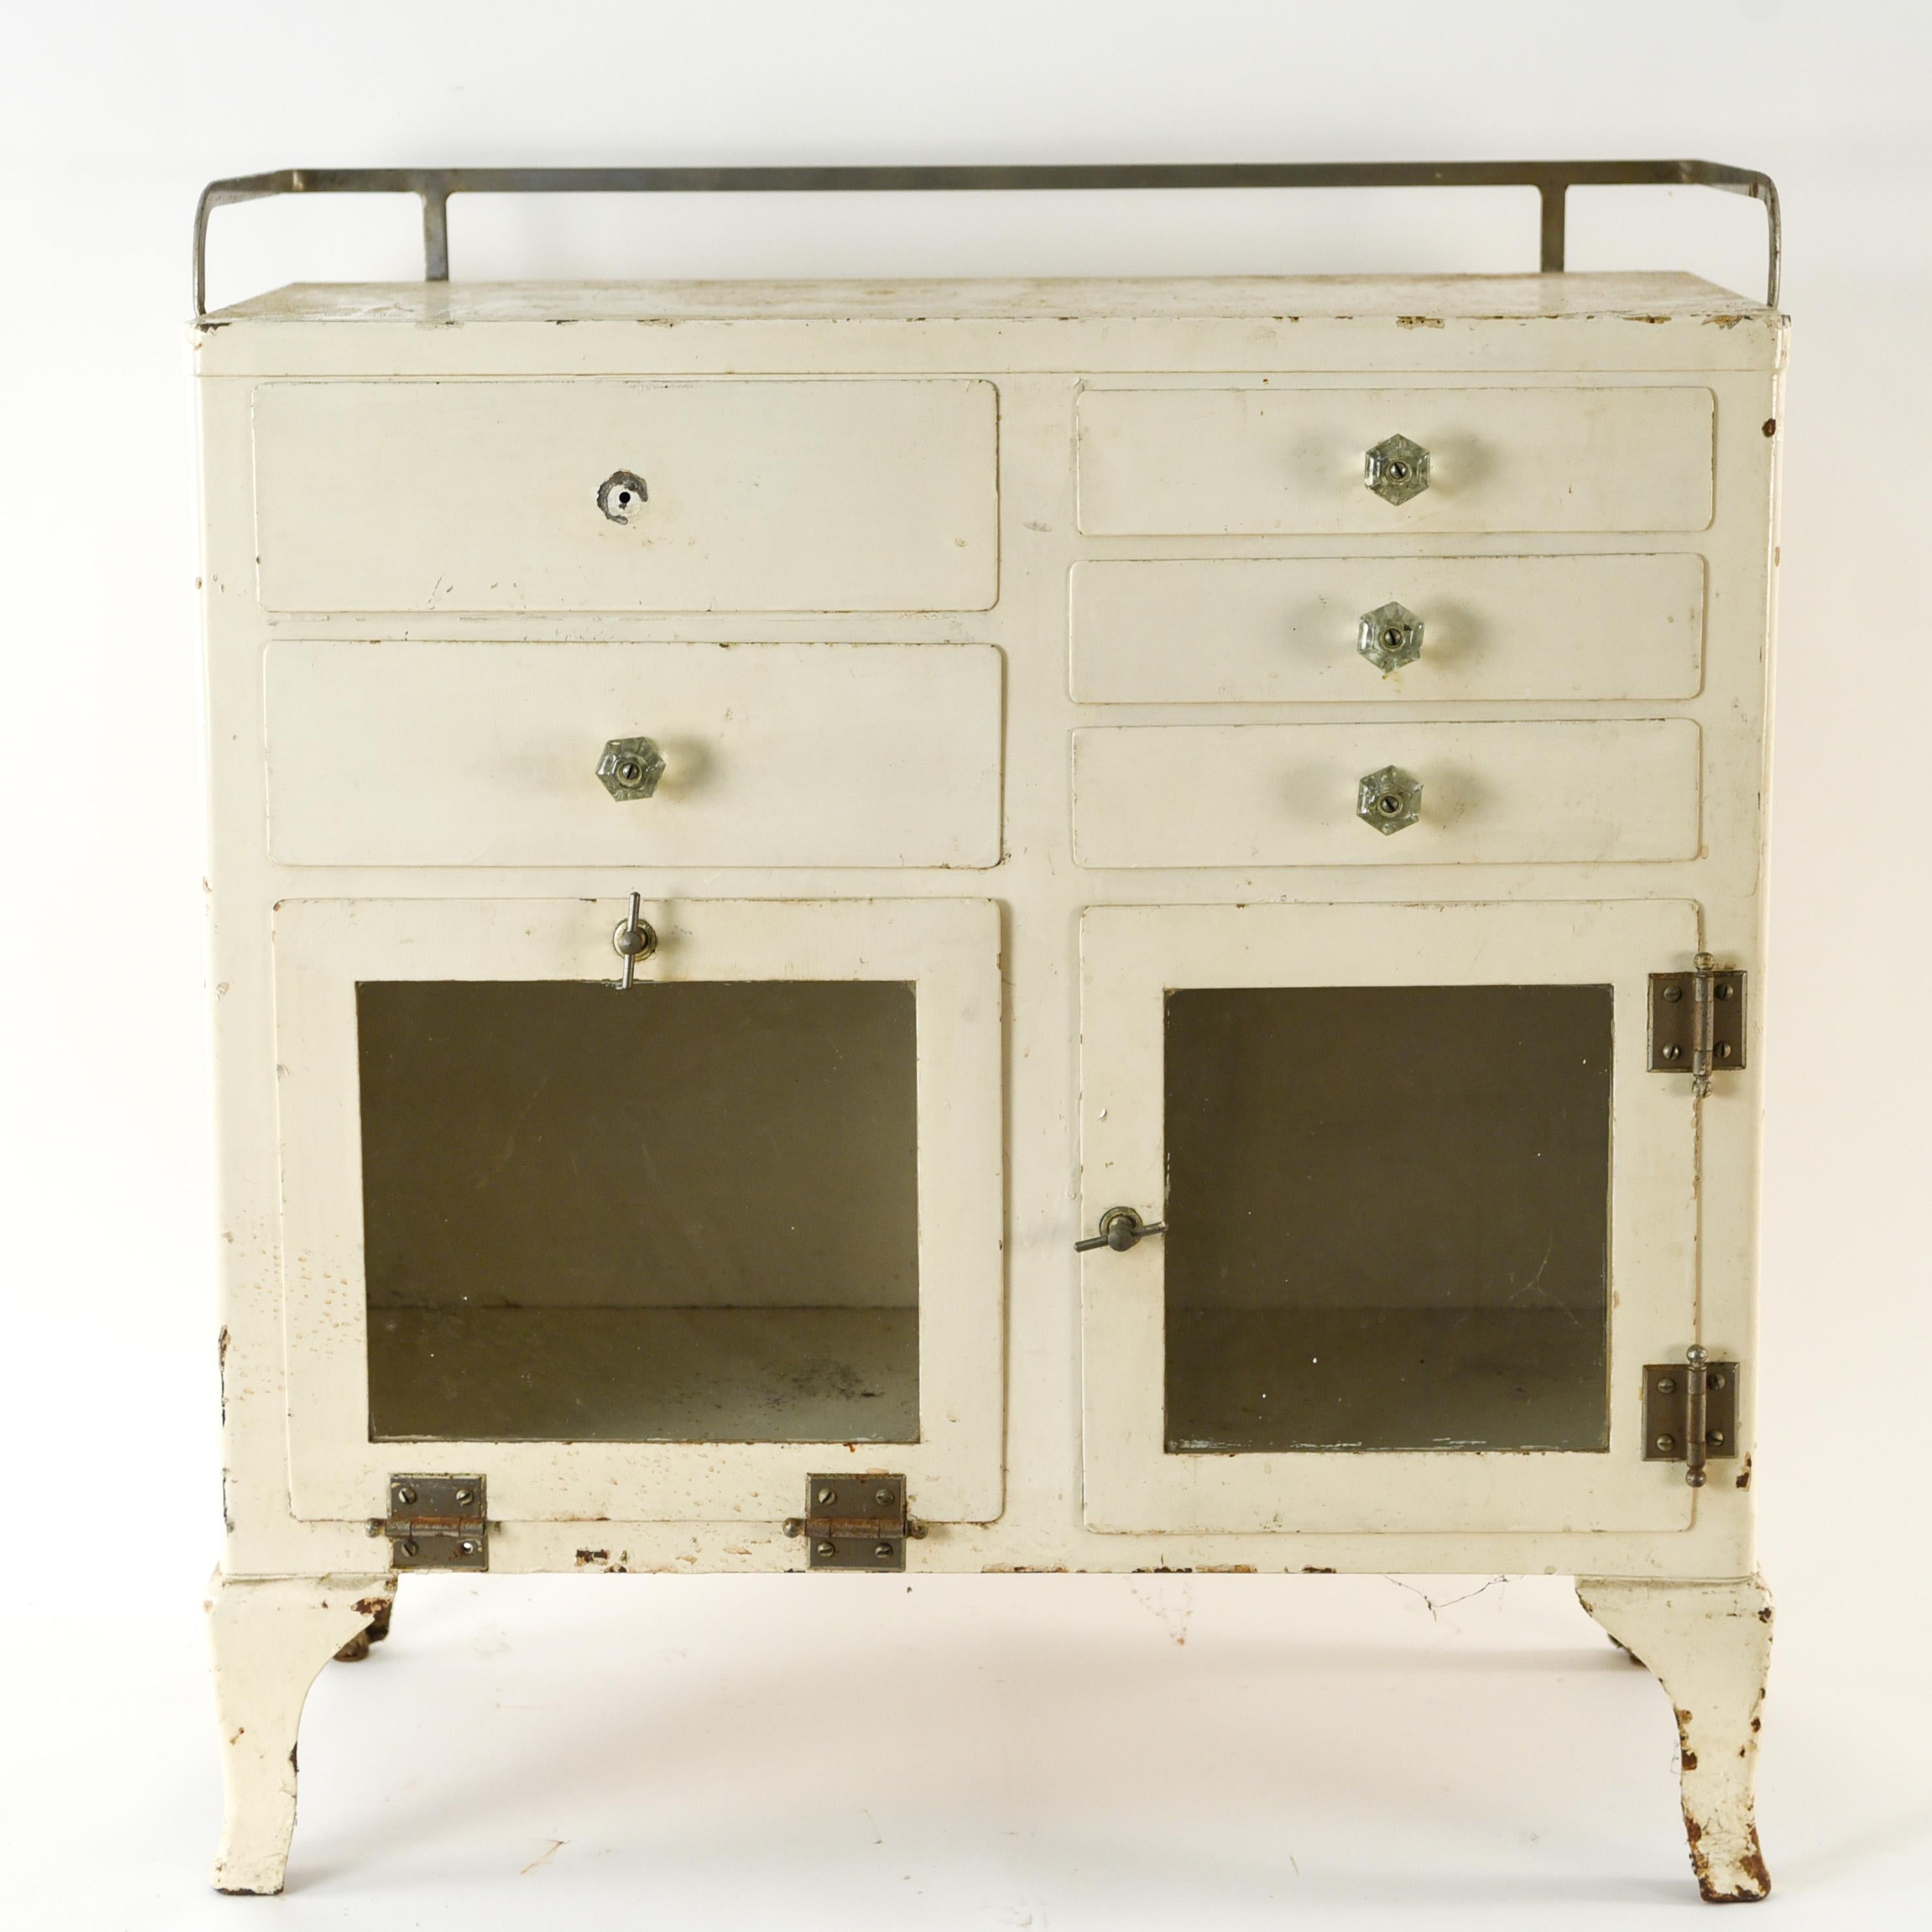 This medical cabinet would be a fun piece to use in a bathroom for storage. Great vintage appearance, circa 1910-1920.